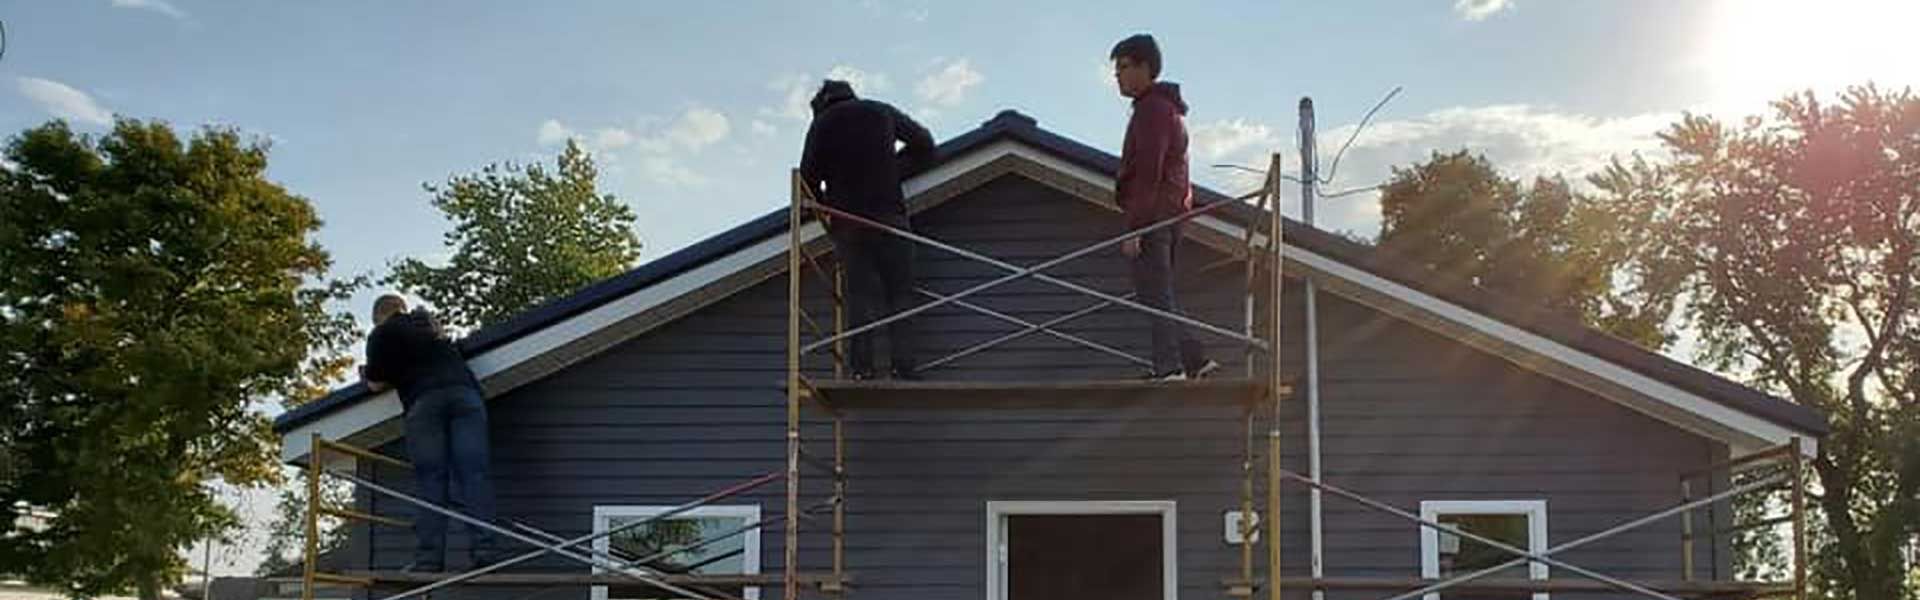 students working on the side of a house on scafolding